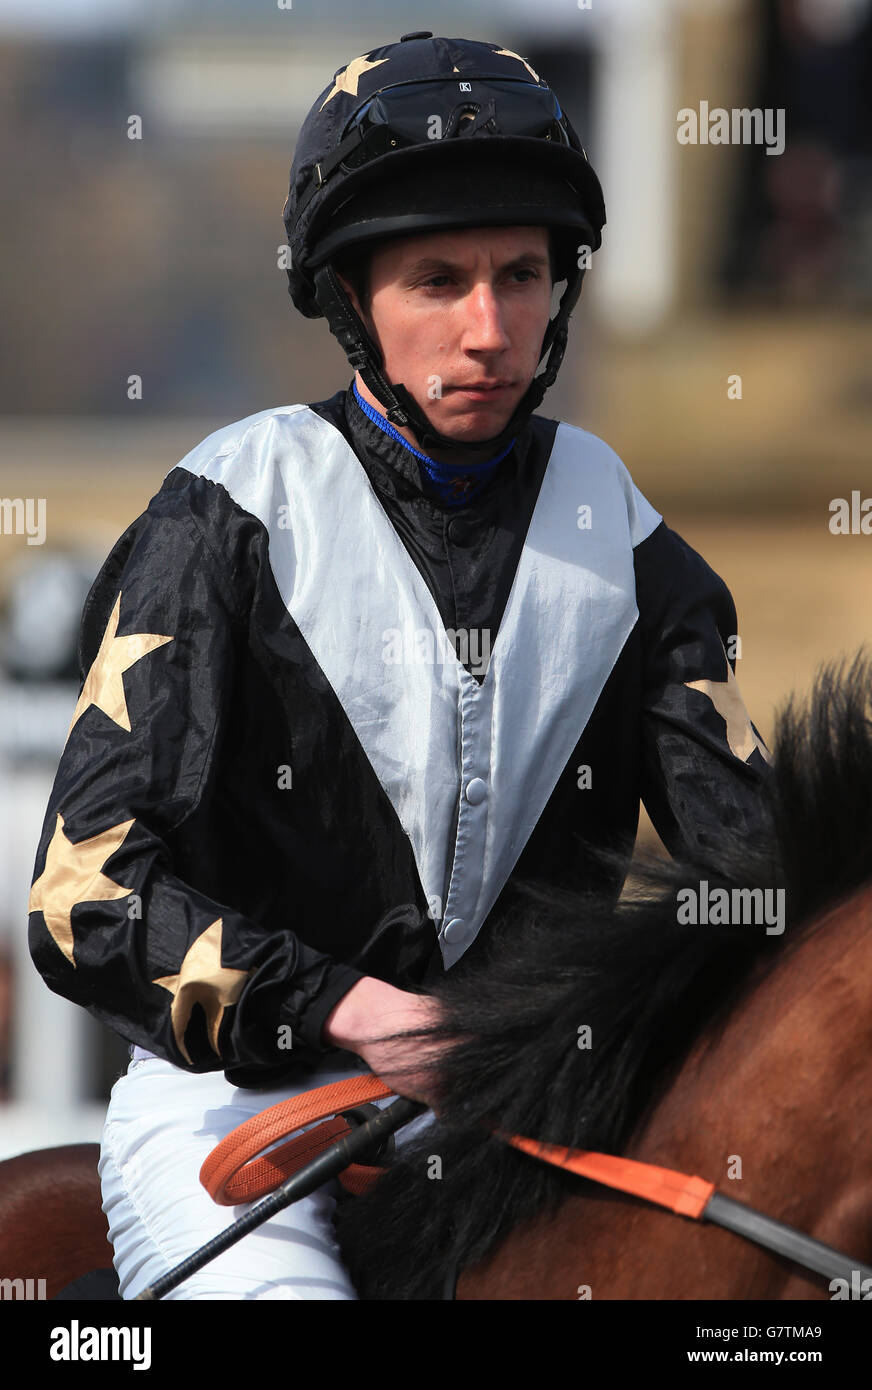 Jockey James Sullivan at Doncaster Racecourse. PRESS ASSOCIATION Photo. Picture date Saturday March 28, 2015. See PA Story RACING Doncaster. Photo credit should read: Nick Potts/PA Wire. Stock Photo